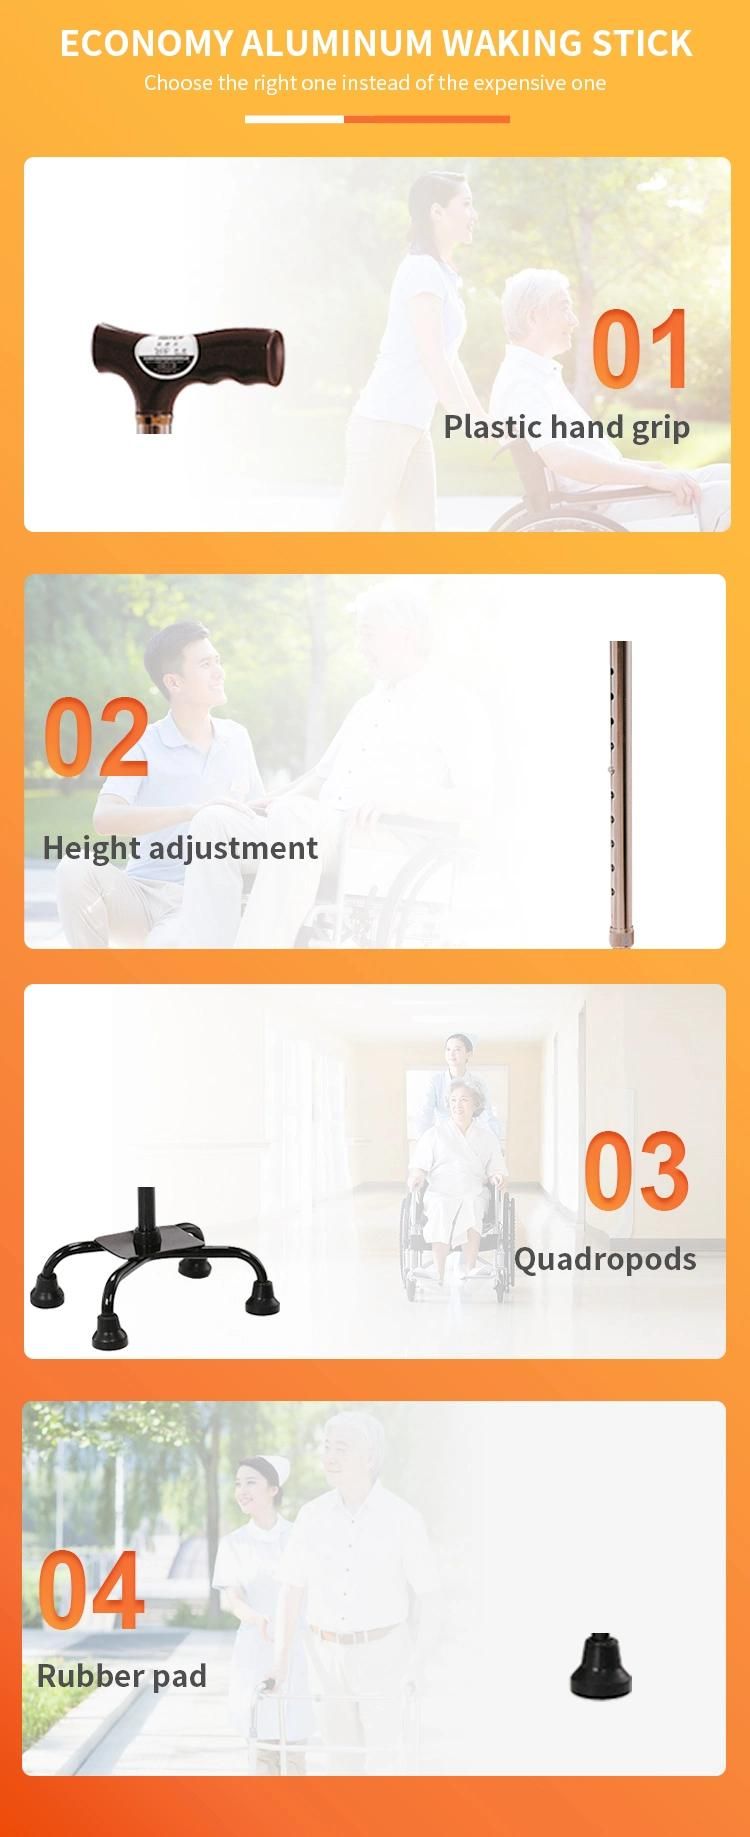 Non-Slip Handle Brown Color Adjustable Height Walking Stick Non-Slip Foot Pad Weight Capacity 100kgs Cane with 4 Legs Hot Selling Cane in Asia Market